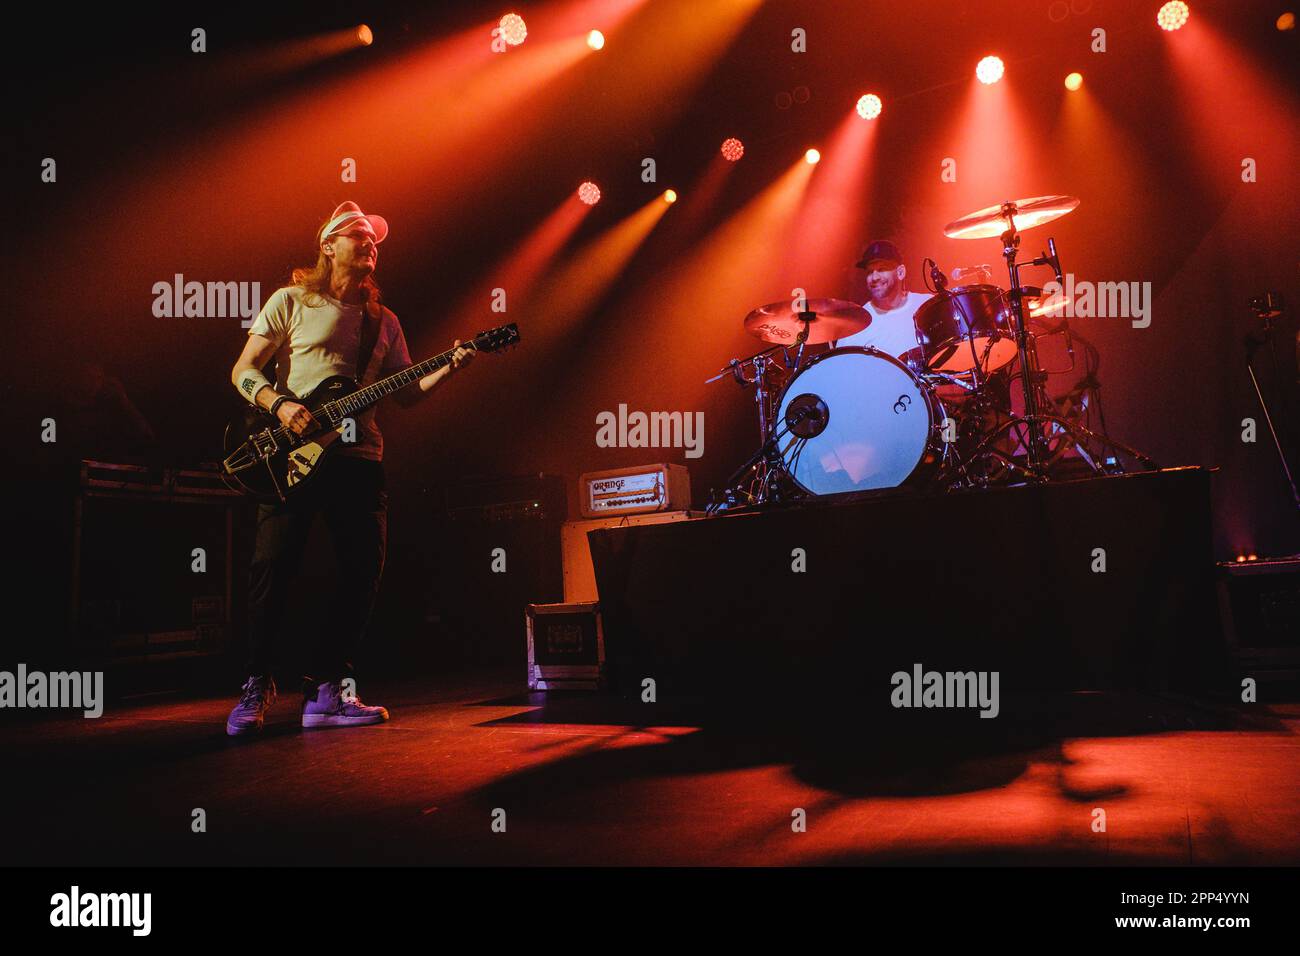 Bern, Switzerland. 21st Apr, 2023. The German indie rock band Sportfreunde Stiller performs a live concert at Bierhübeli in Bern. Here singer and musician Peter Brugger is seen live on stage with drummer Florian Weber. (Photo Credit: Gonzales Photo/Alamy Live News Stock Photo